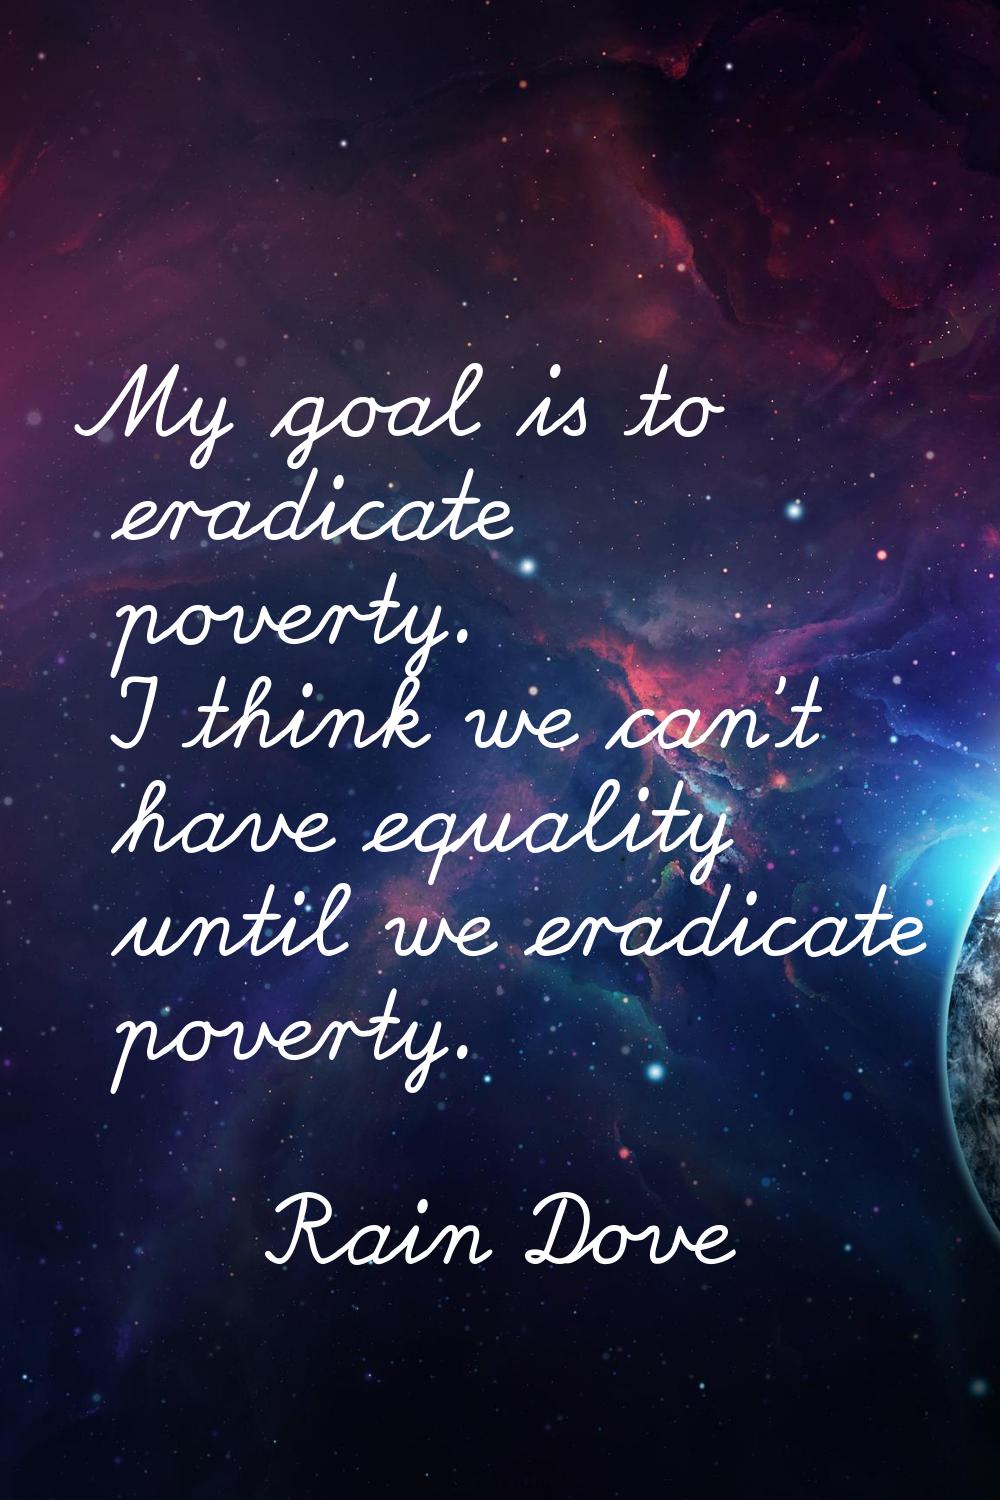 My goal is to eradicate poverty. I think we can't have equality until we eradicate poverty.